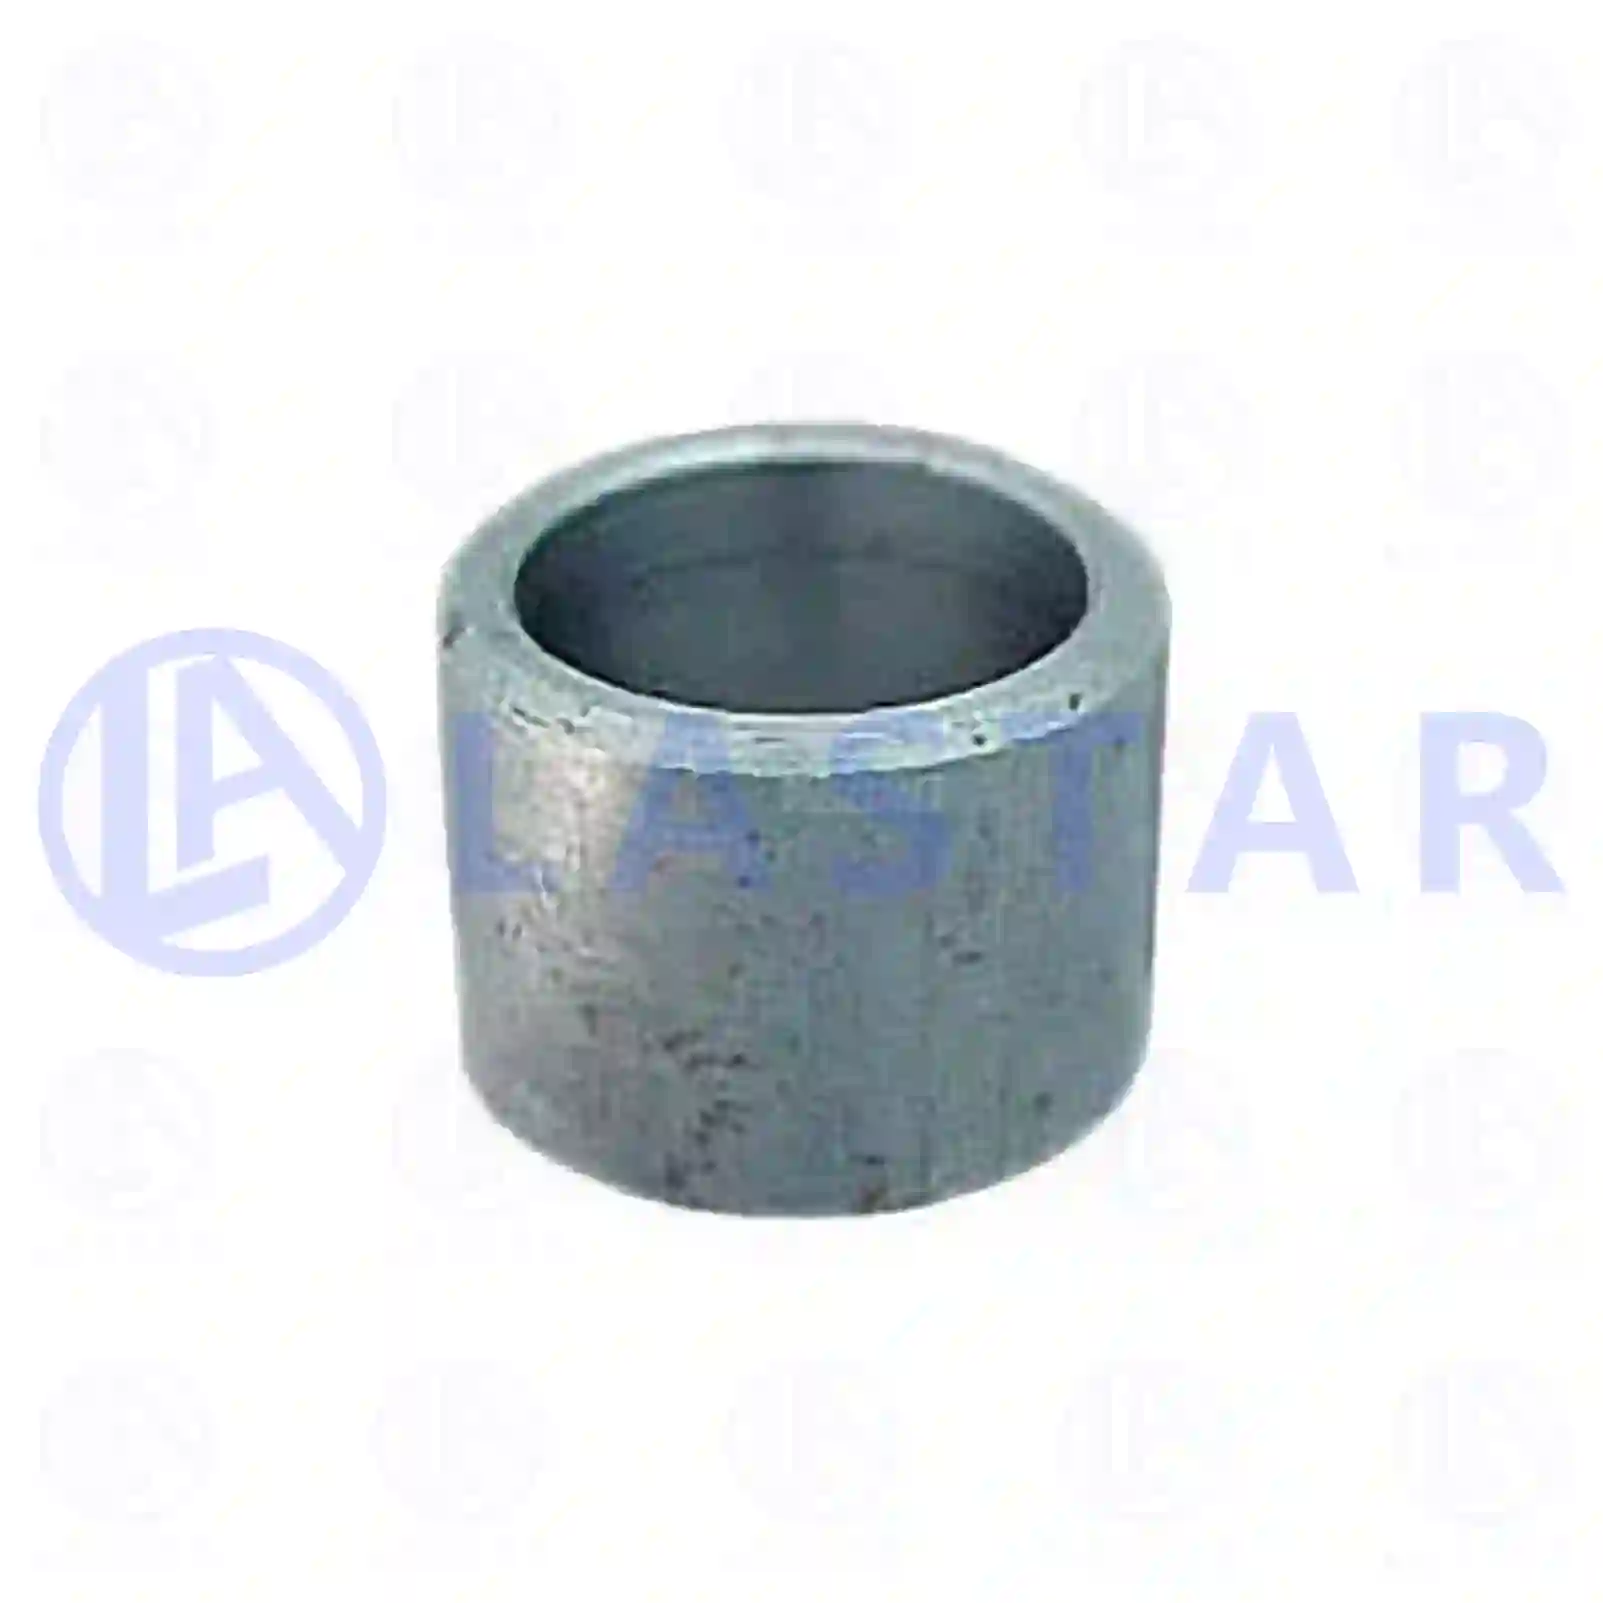 Fixation sleeve, 77700206, 3260110054, , ||  77700206 Lastar Spare Part | Truck Spare Parts, Auotomotive Spare Parts Fixation sleeve, 77700206, 3260110054, , ||  77700206 Lastar Spare Part | Truck Spare Parts, Auotomotive Spare Parts